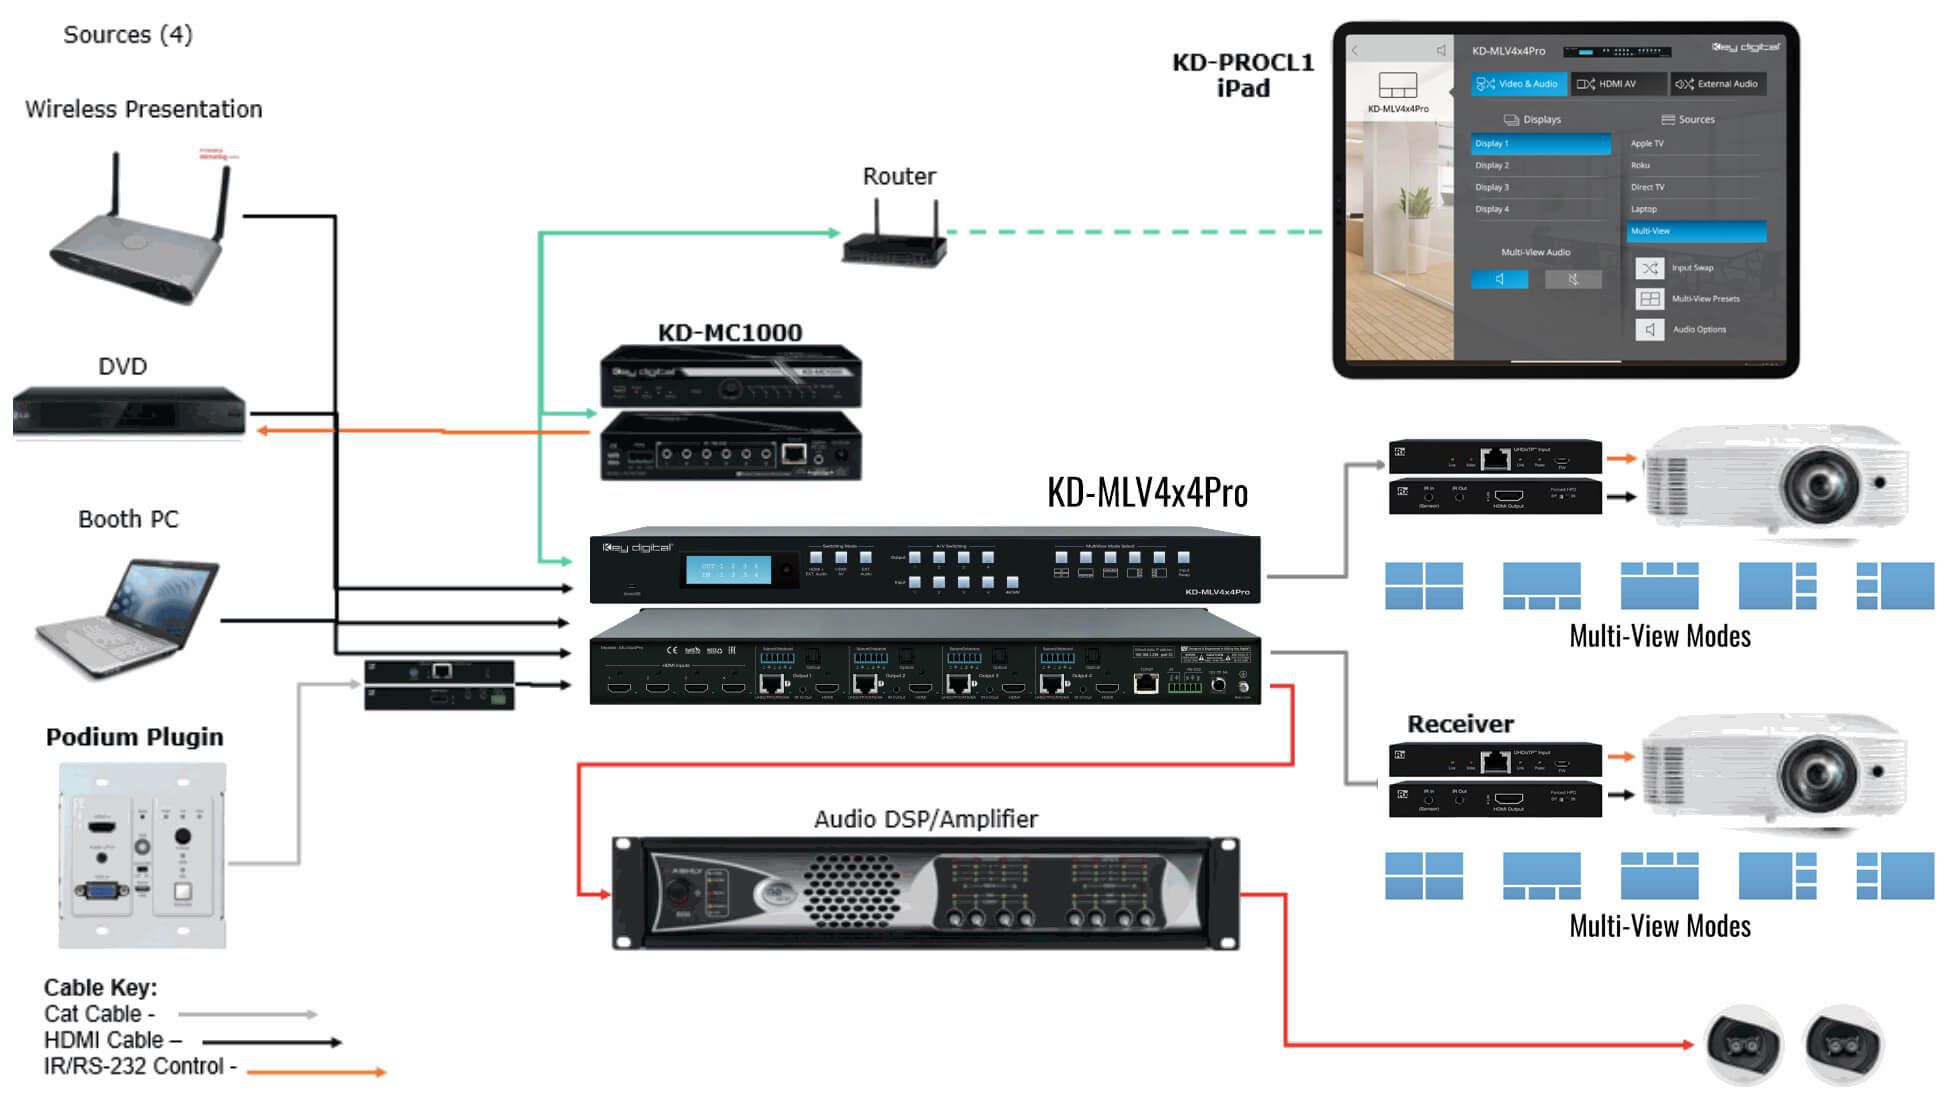 Enhancing Church Audio System with Versatile Content Display from Podium, PC, Wireless Casting, and More - Full-Screen, Quad-Screen, or Custom Layouts.